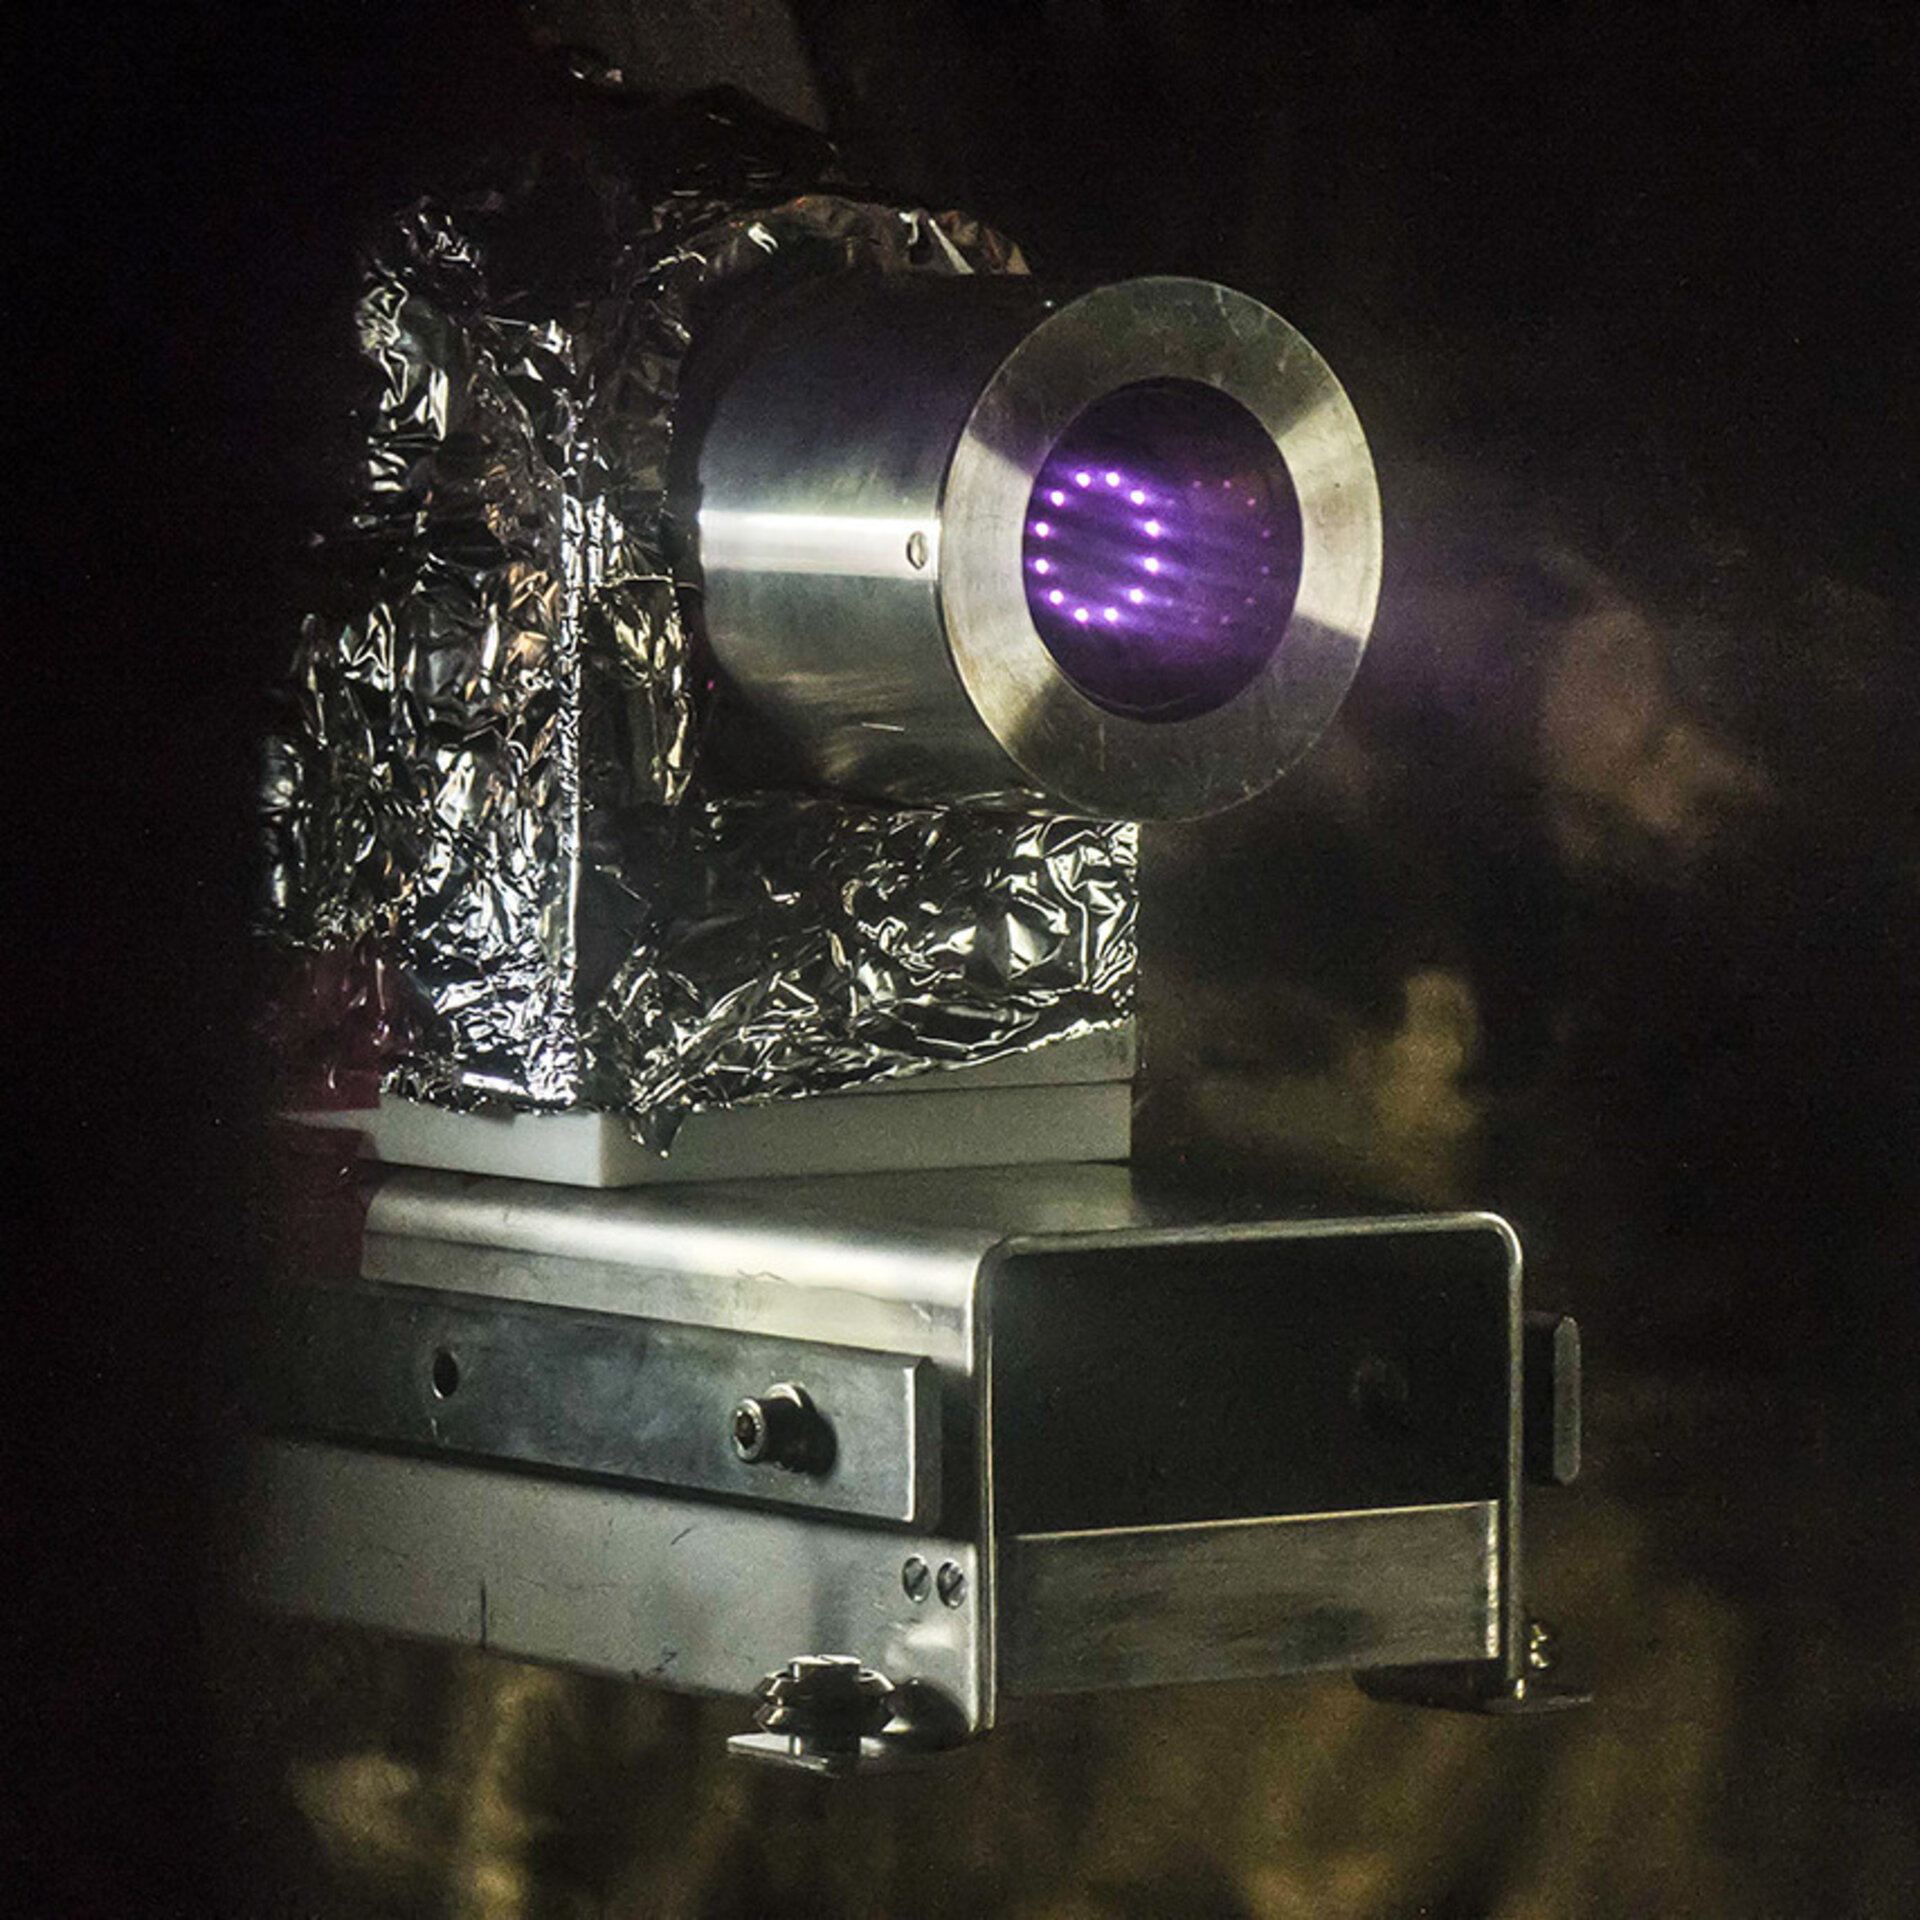 MiniRIT thruster being tested